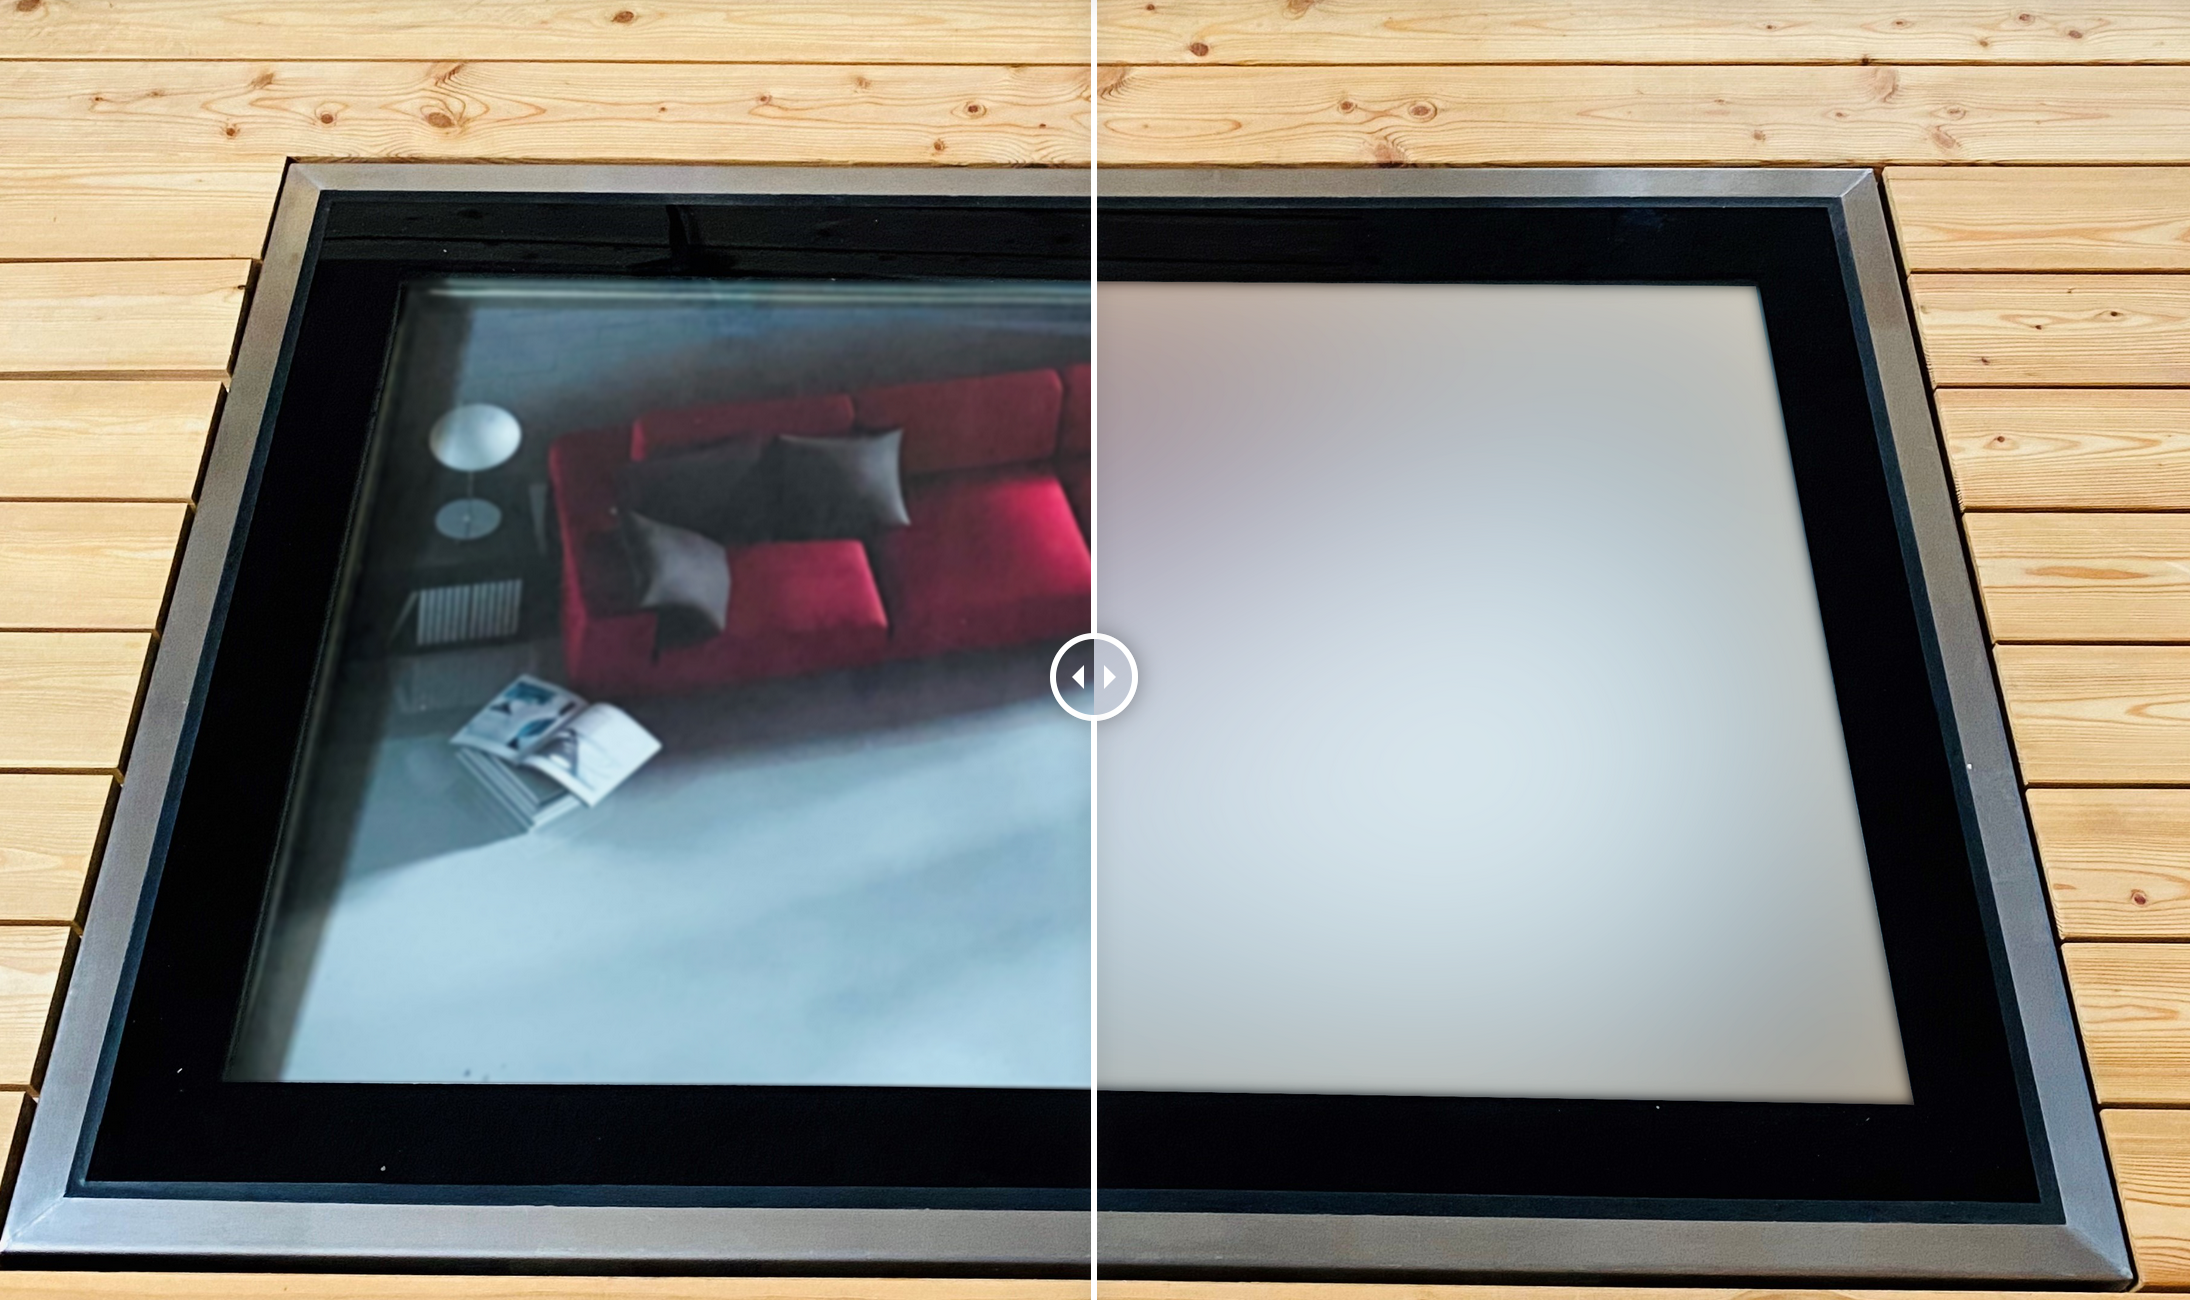 Exclusive option: PRIVA-LITE® - privacy at the touch of a button